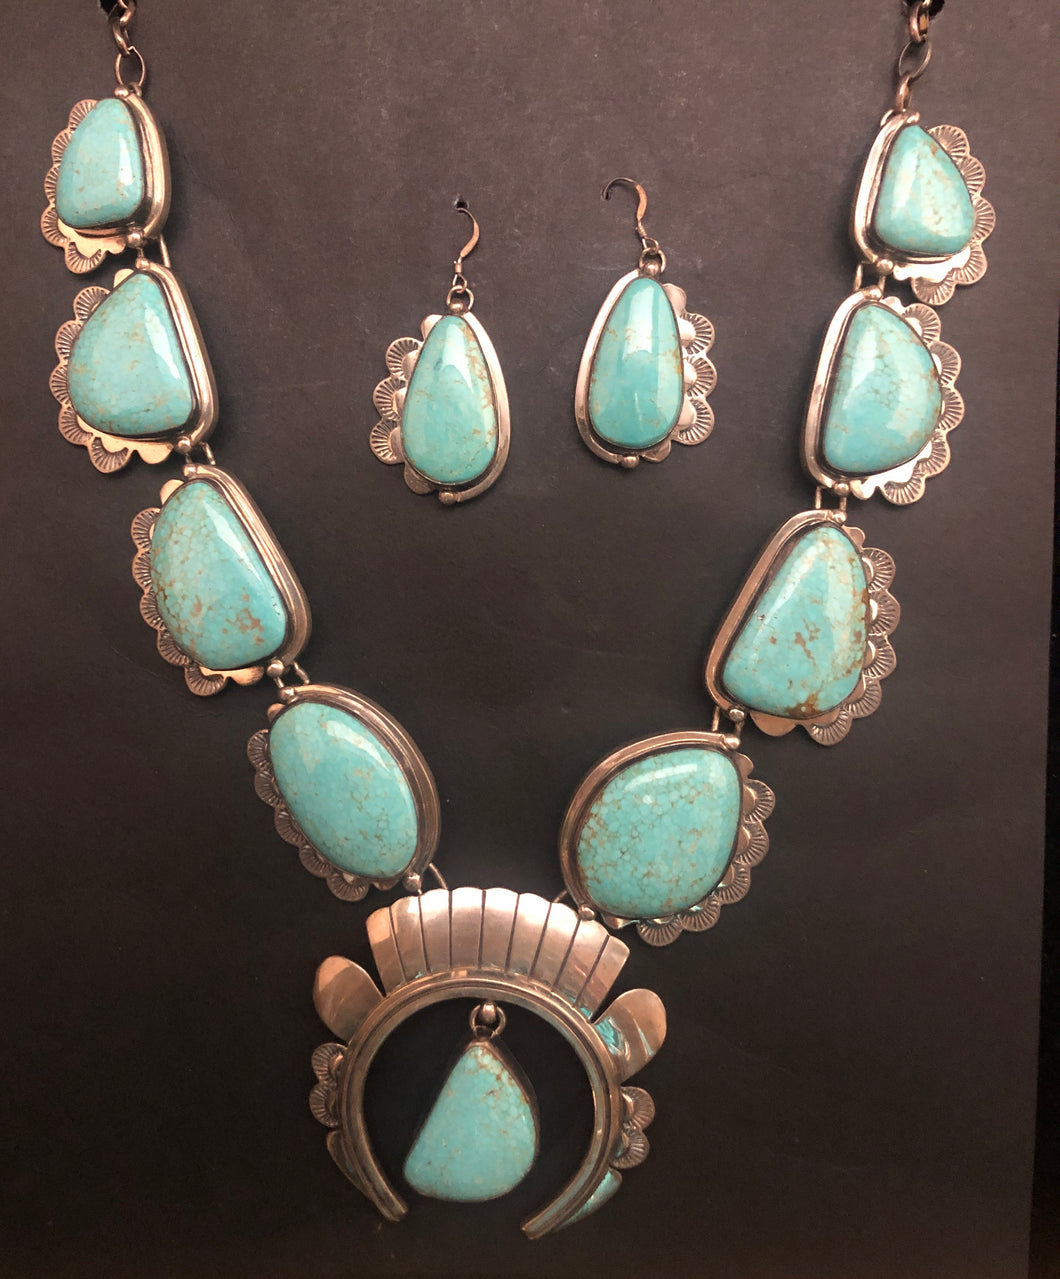 Turquoise Sterling Silver Squash Blossom Necklace Earring Set